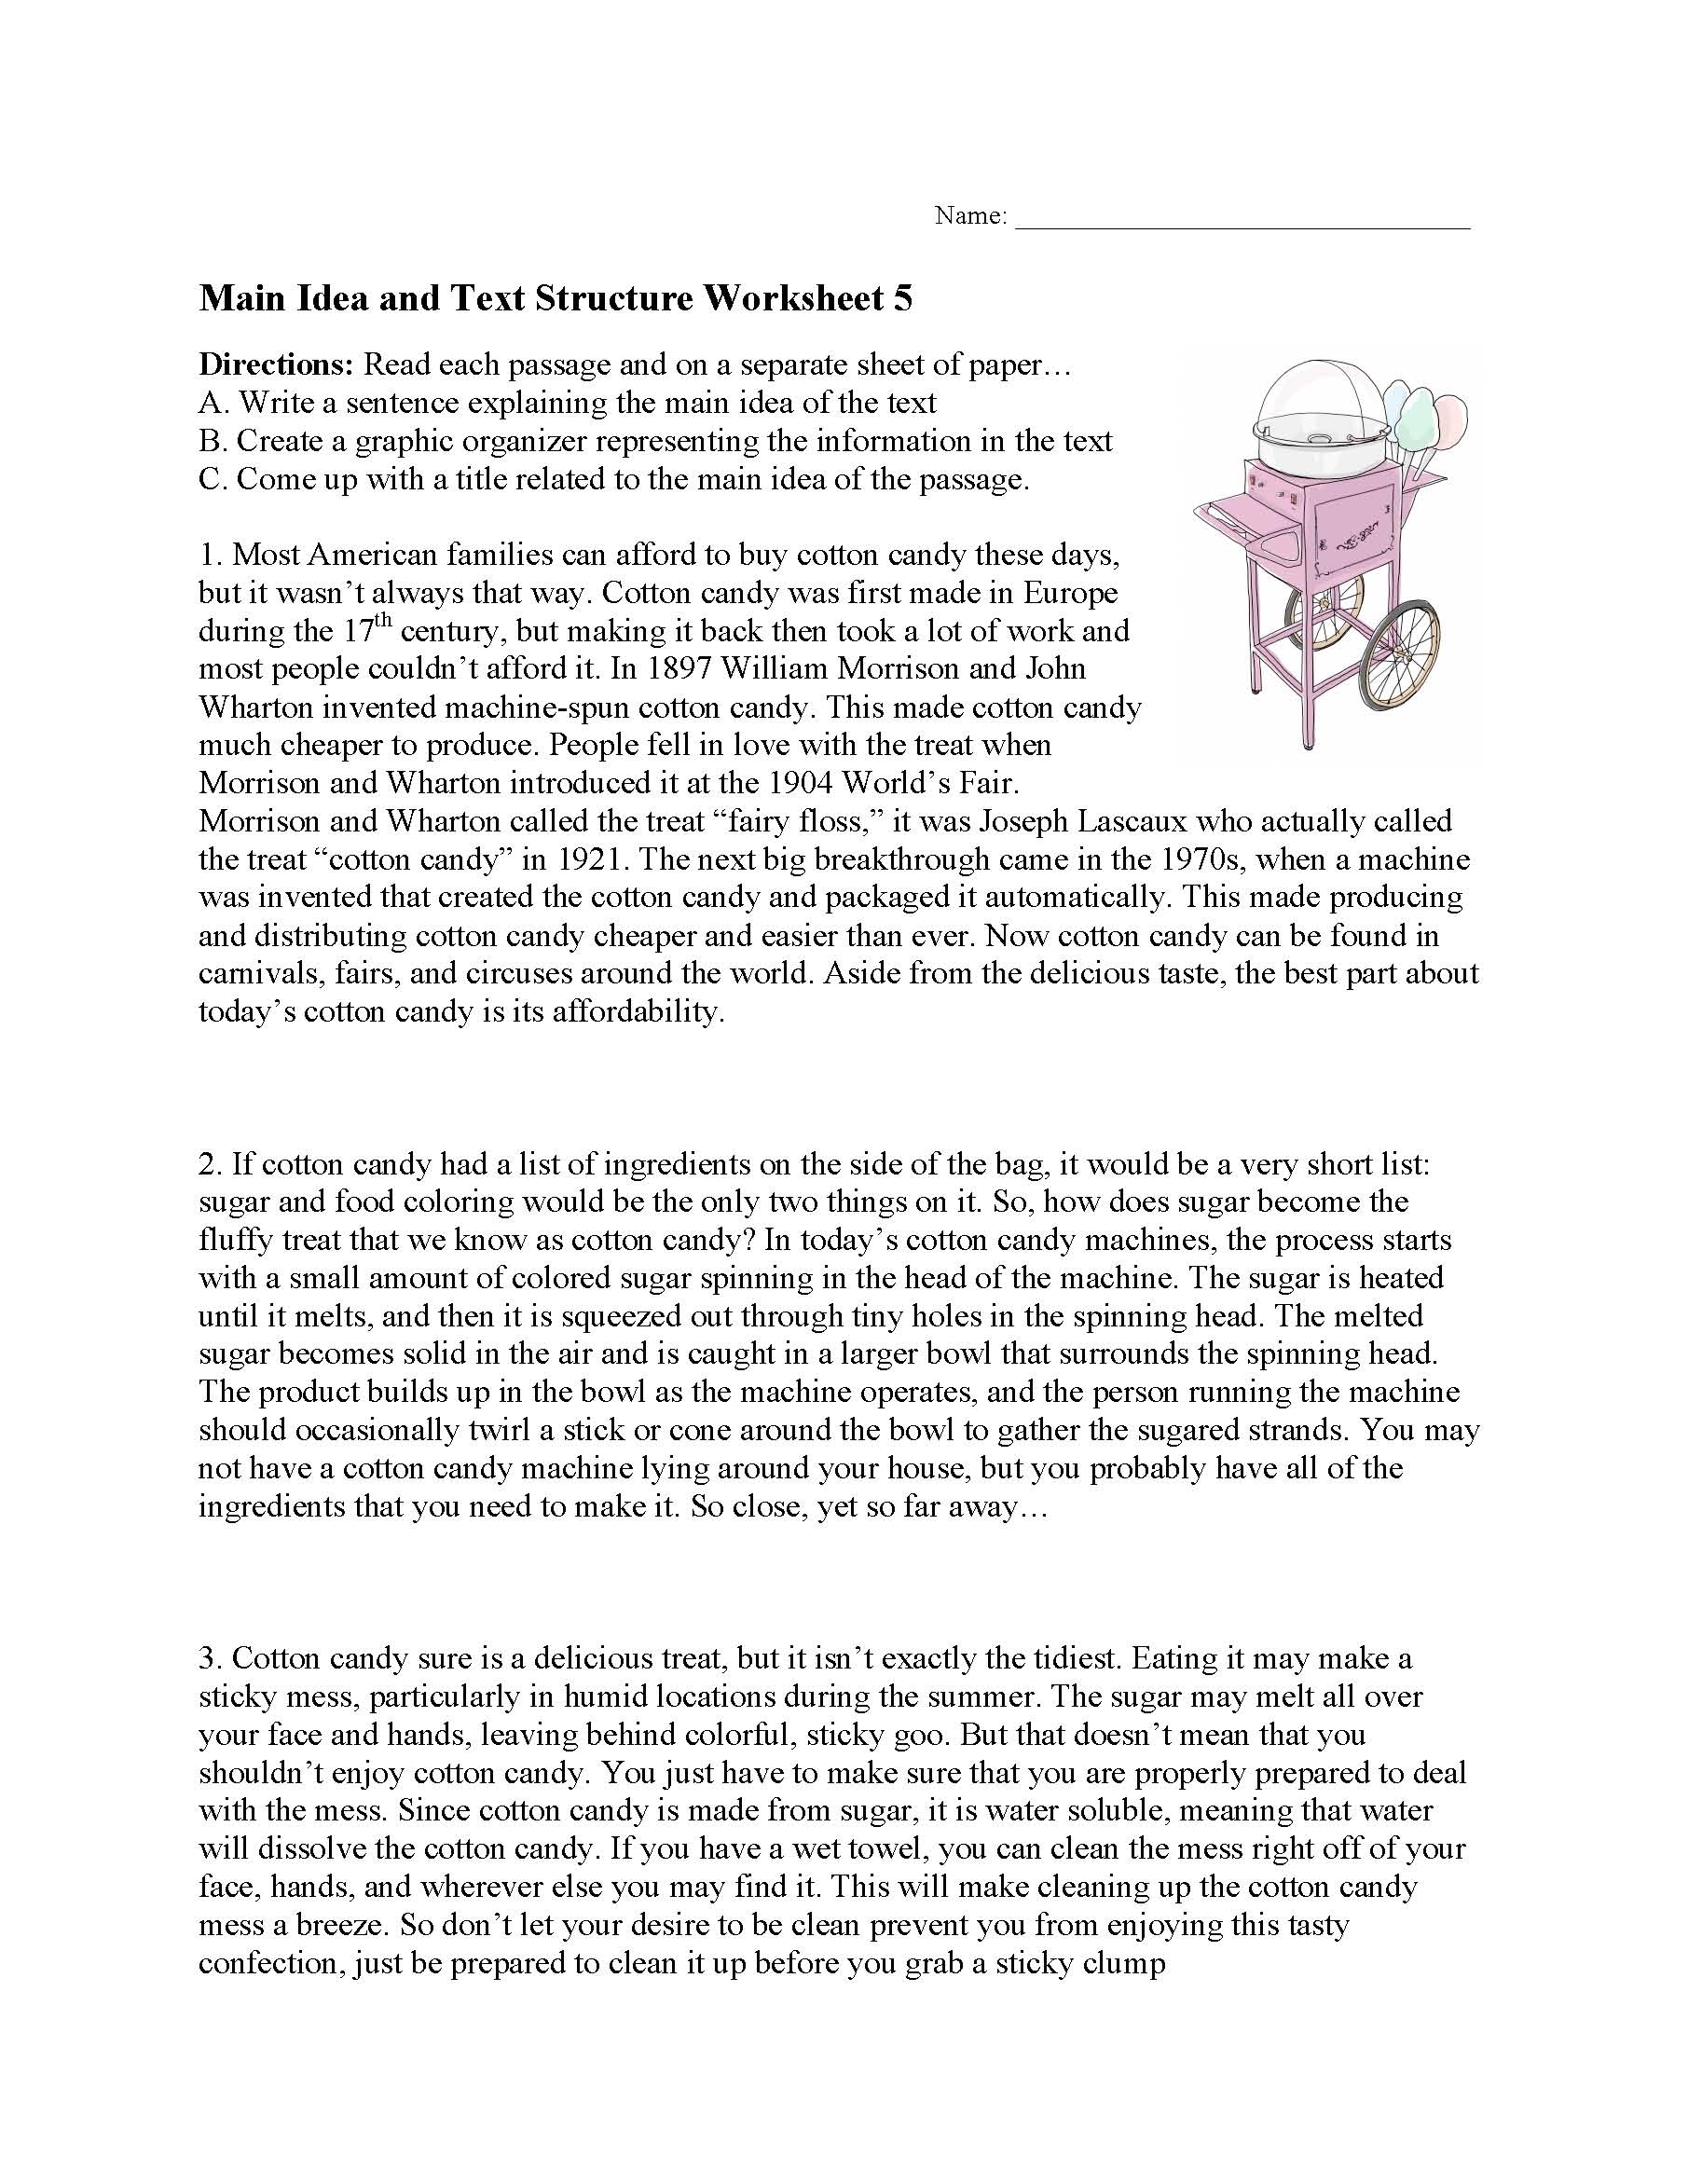 Main Idea and Text Structure Worksheet 25  Preview Throughout Main Idea Worksheet 5